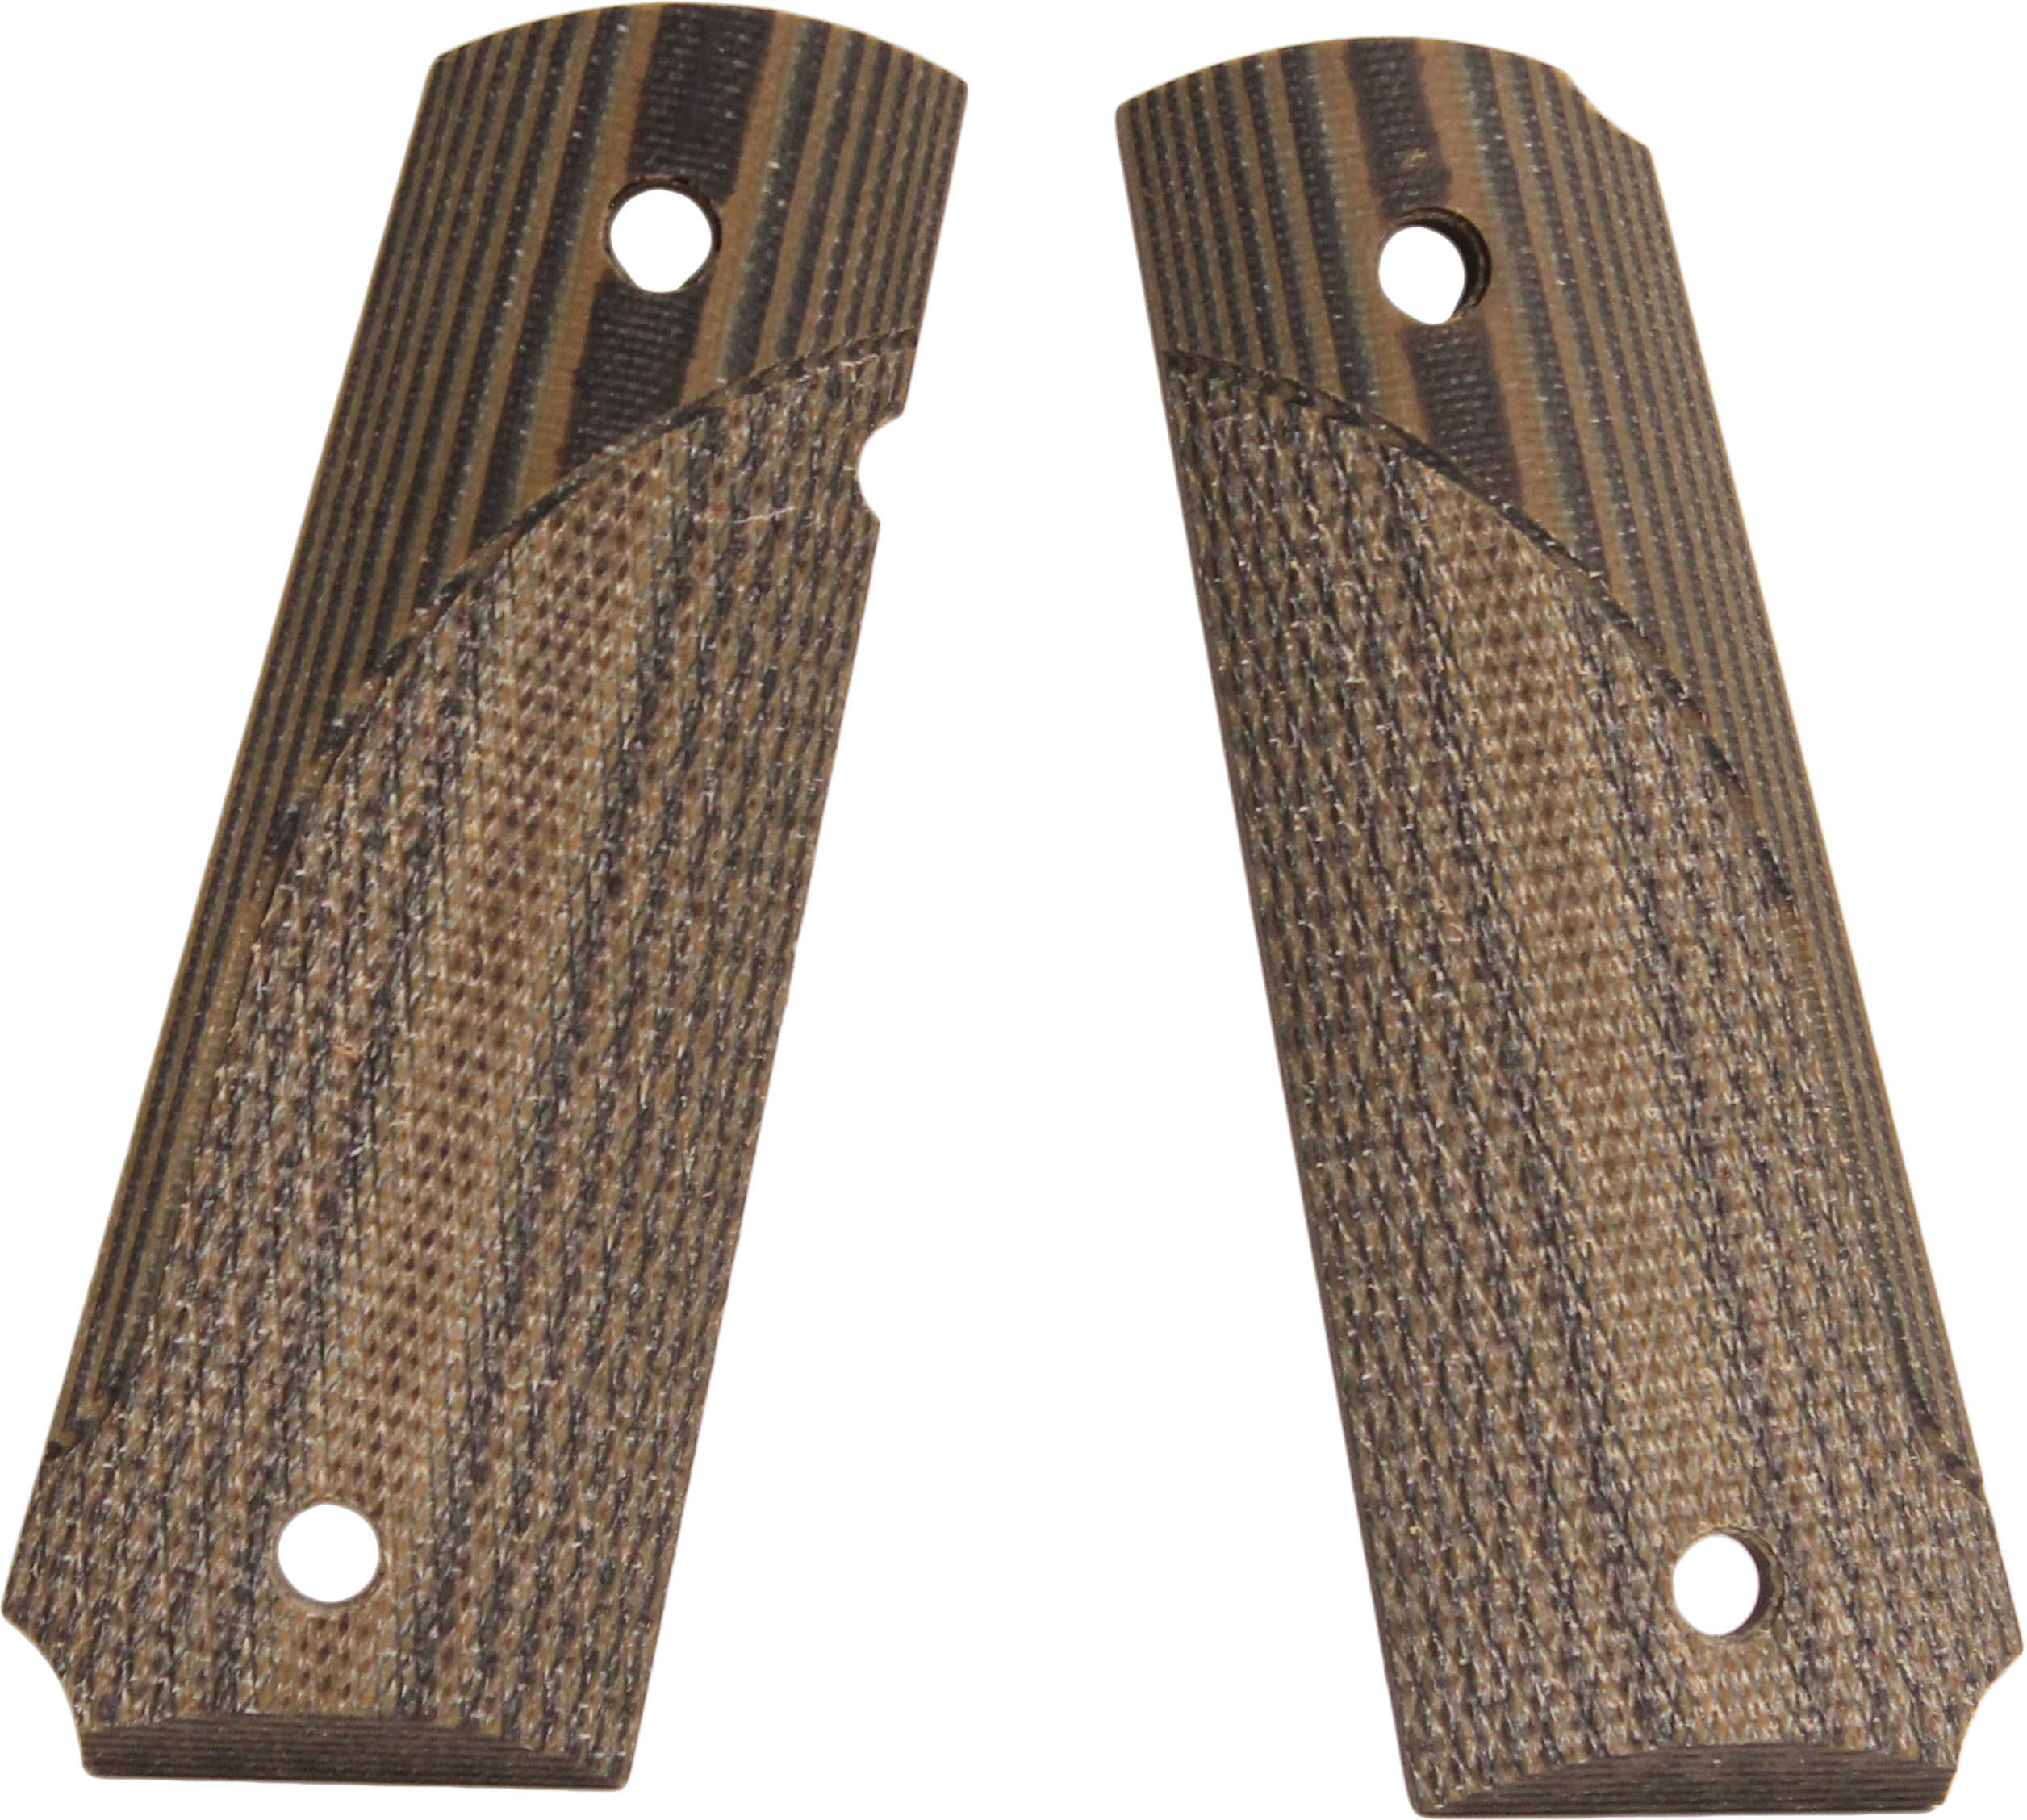 Pachmayr G10 Material Fits 1911 Green/Black Checkered Finish 61000